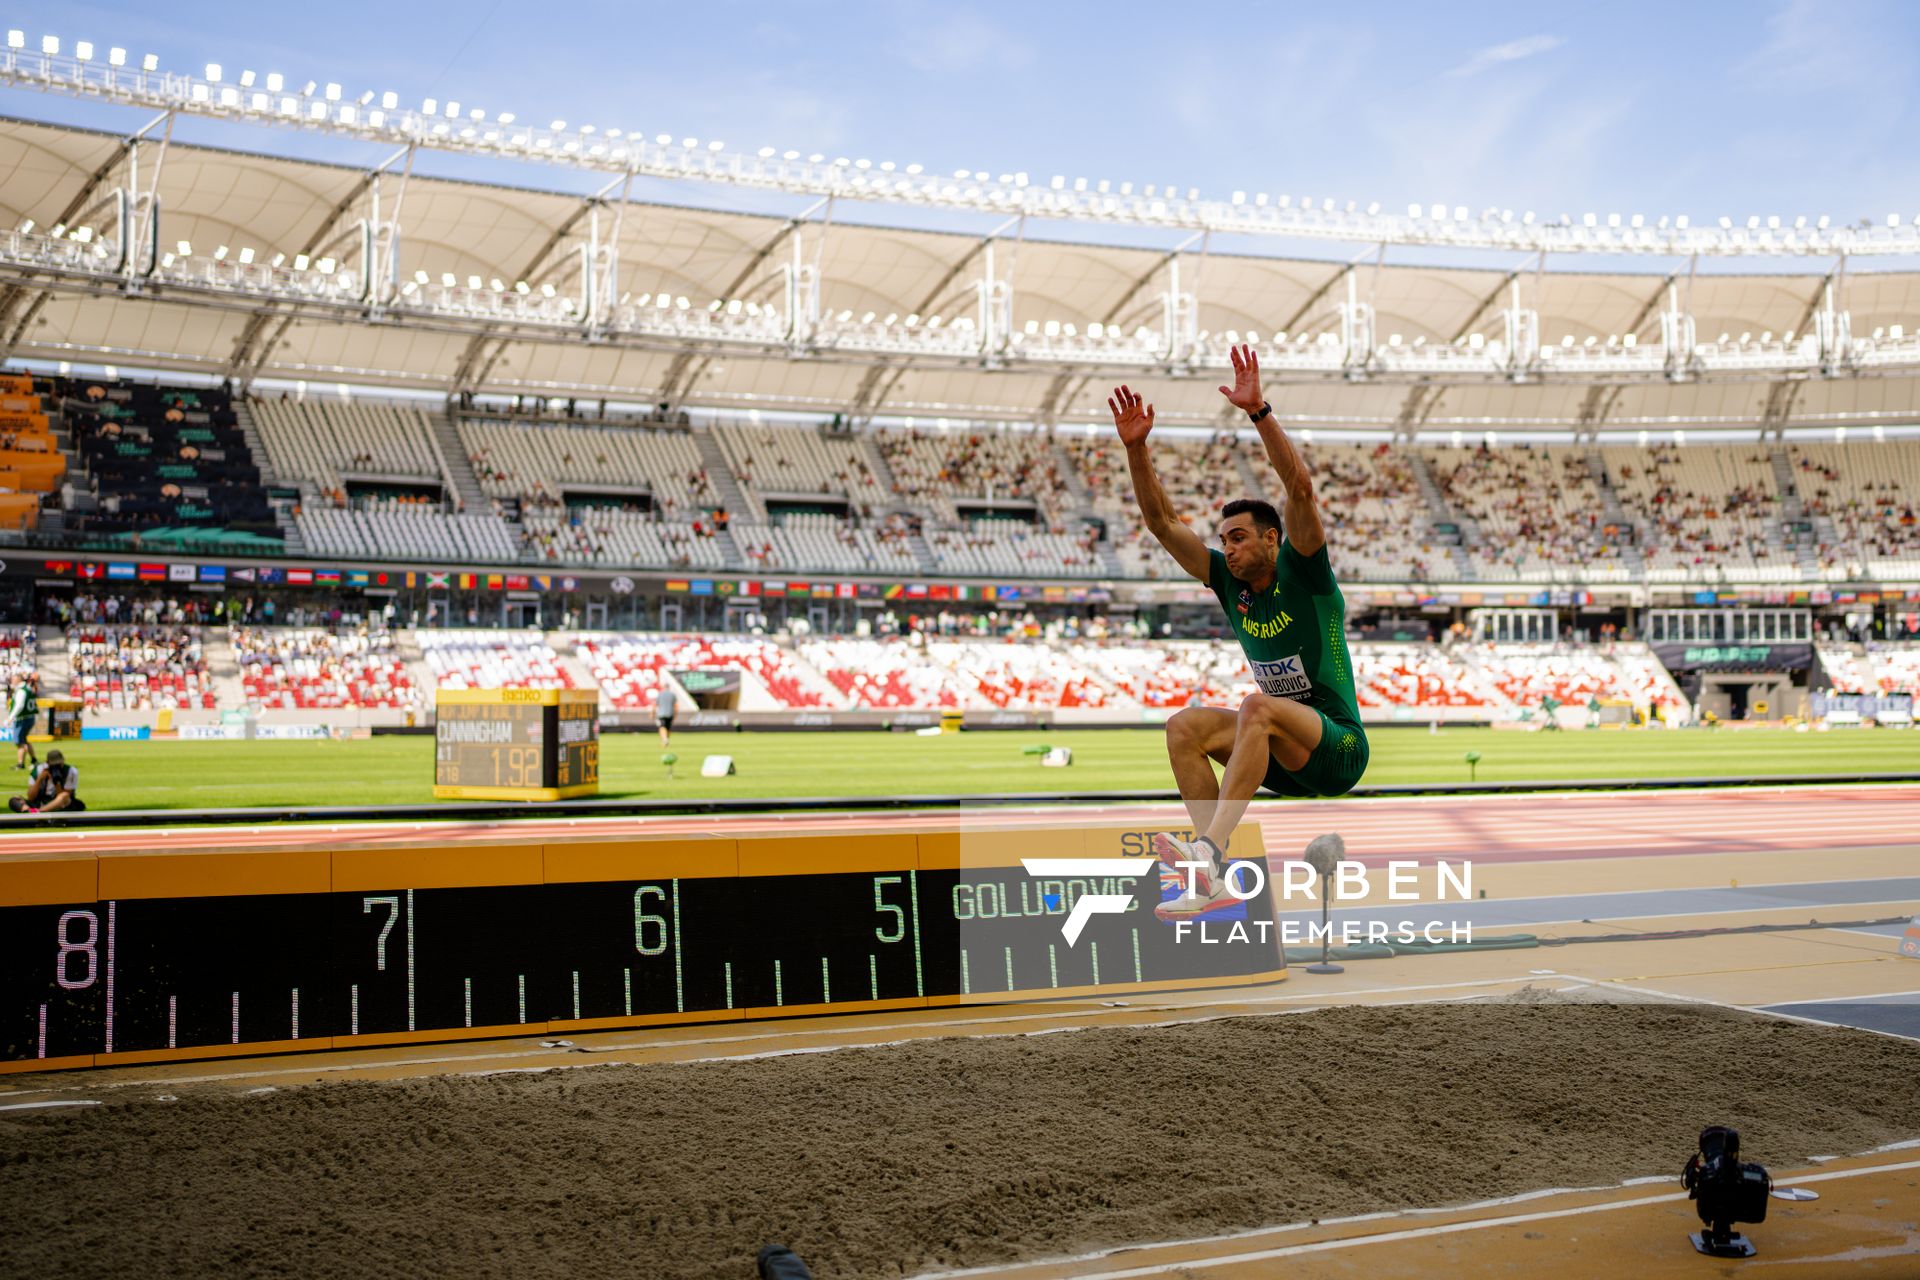 Daniel Golubovic (AUS/Australia) during the Decathlon Long Jump on Day 6 of the World Athletics Championships Budapest 23 at the National Athletics Centre in Budapest, Hungary on August 24, 2023.